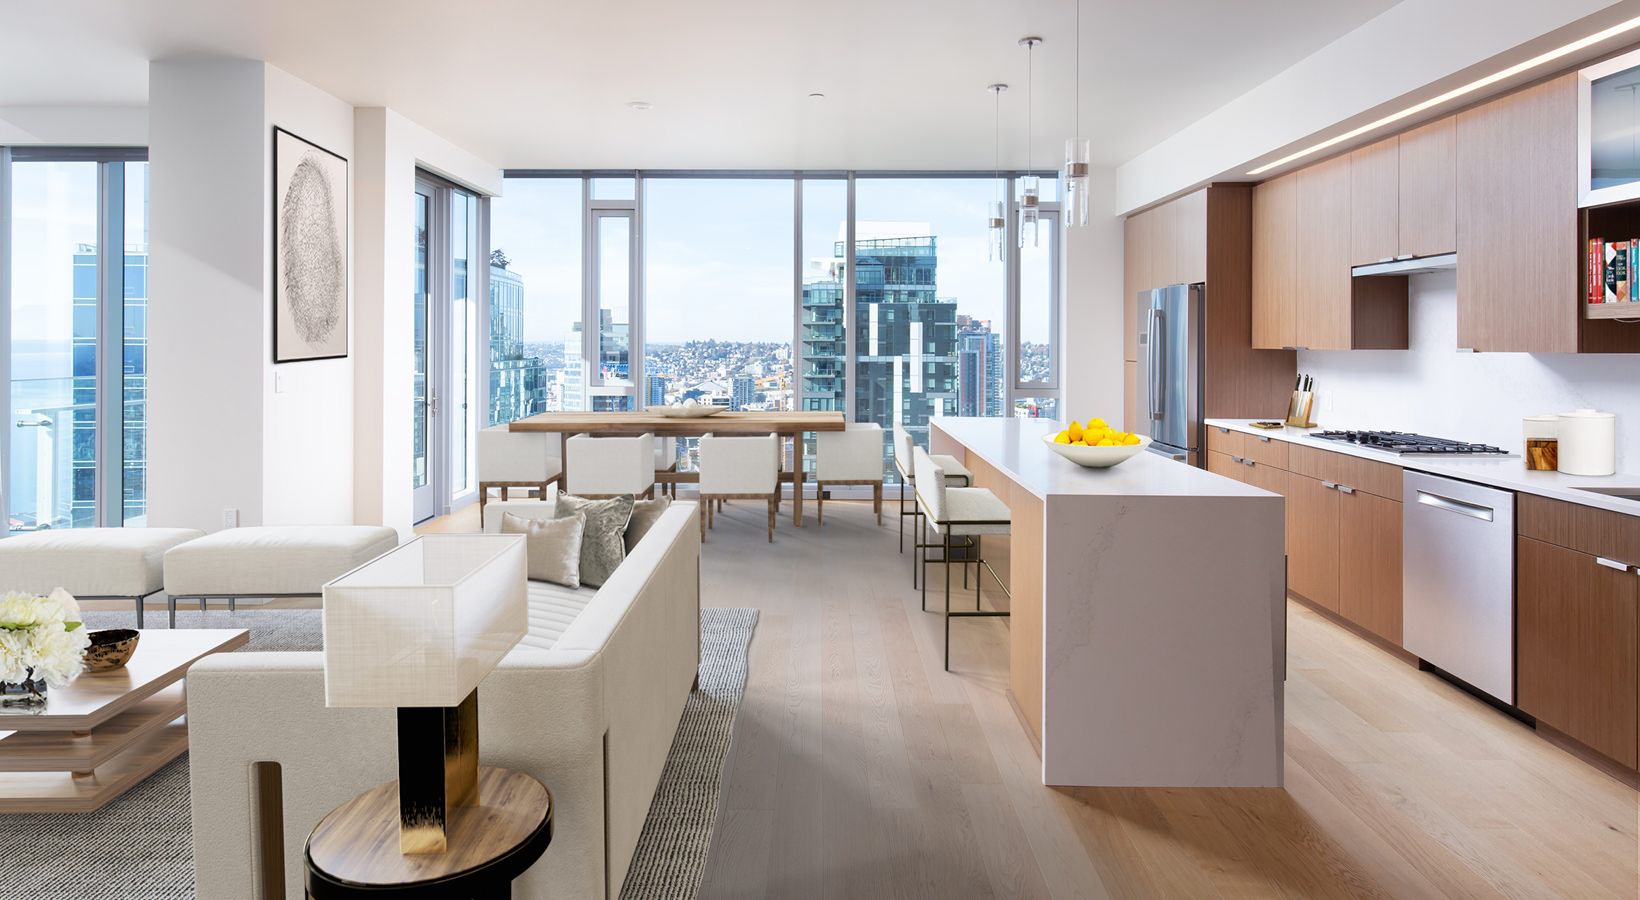 open concept floor plan with floor-to-ceiling windows and amazing views of the city